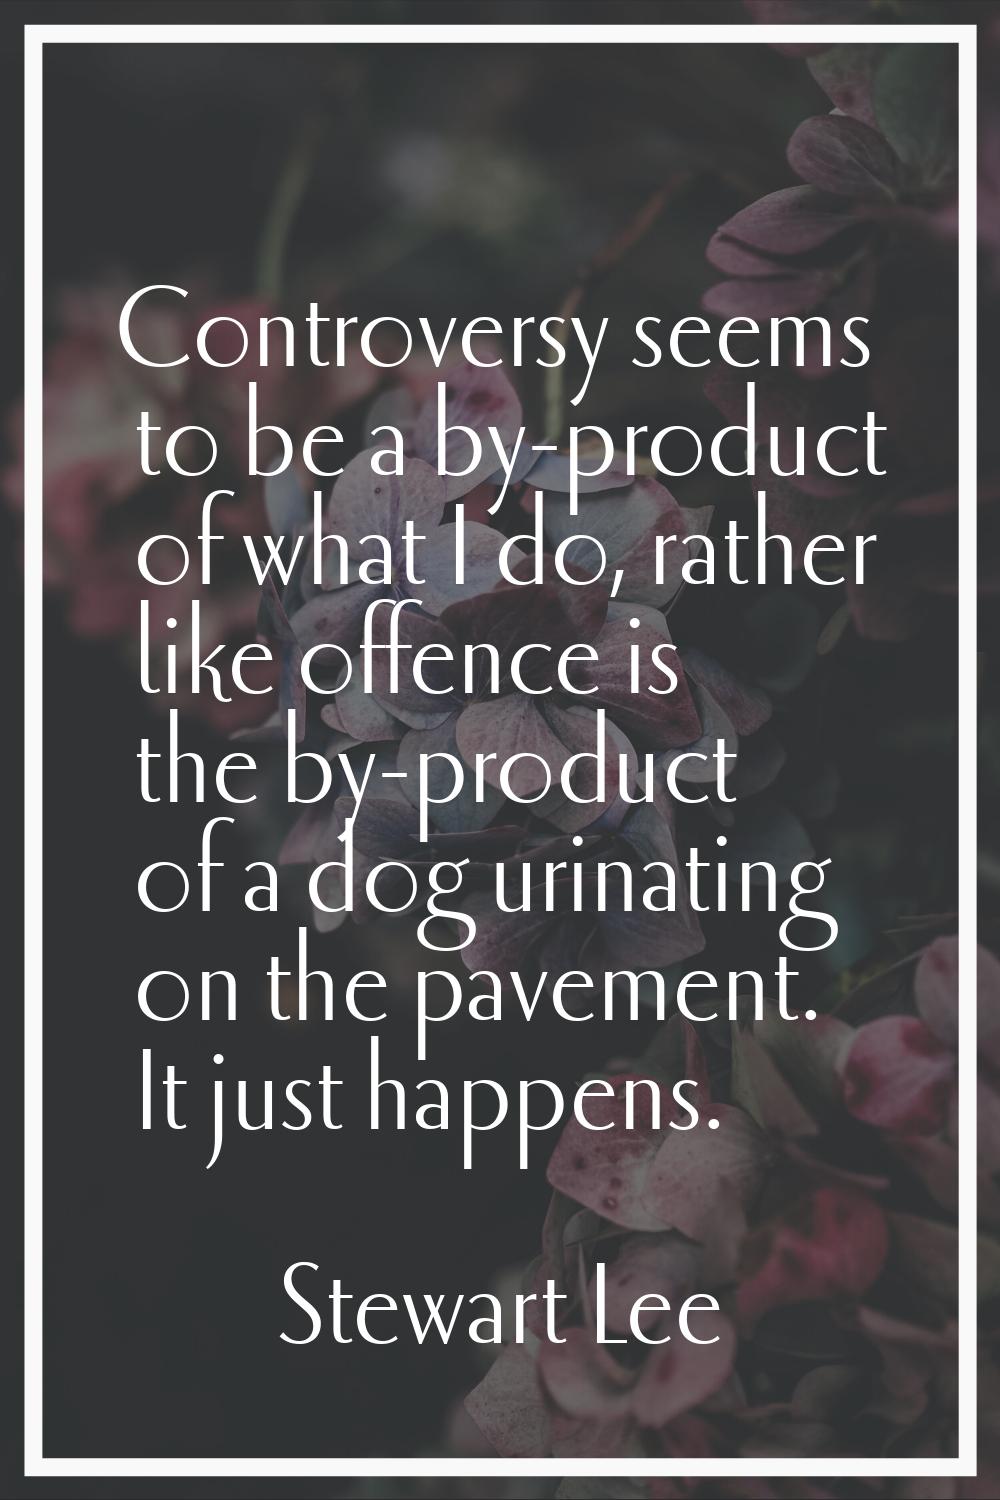 Controversy seems to be a by-product of what I do, rather like offence is the by-product of a dog u